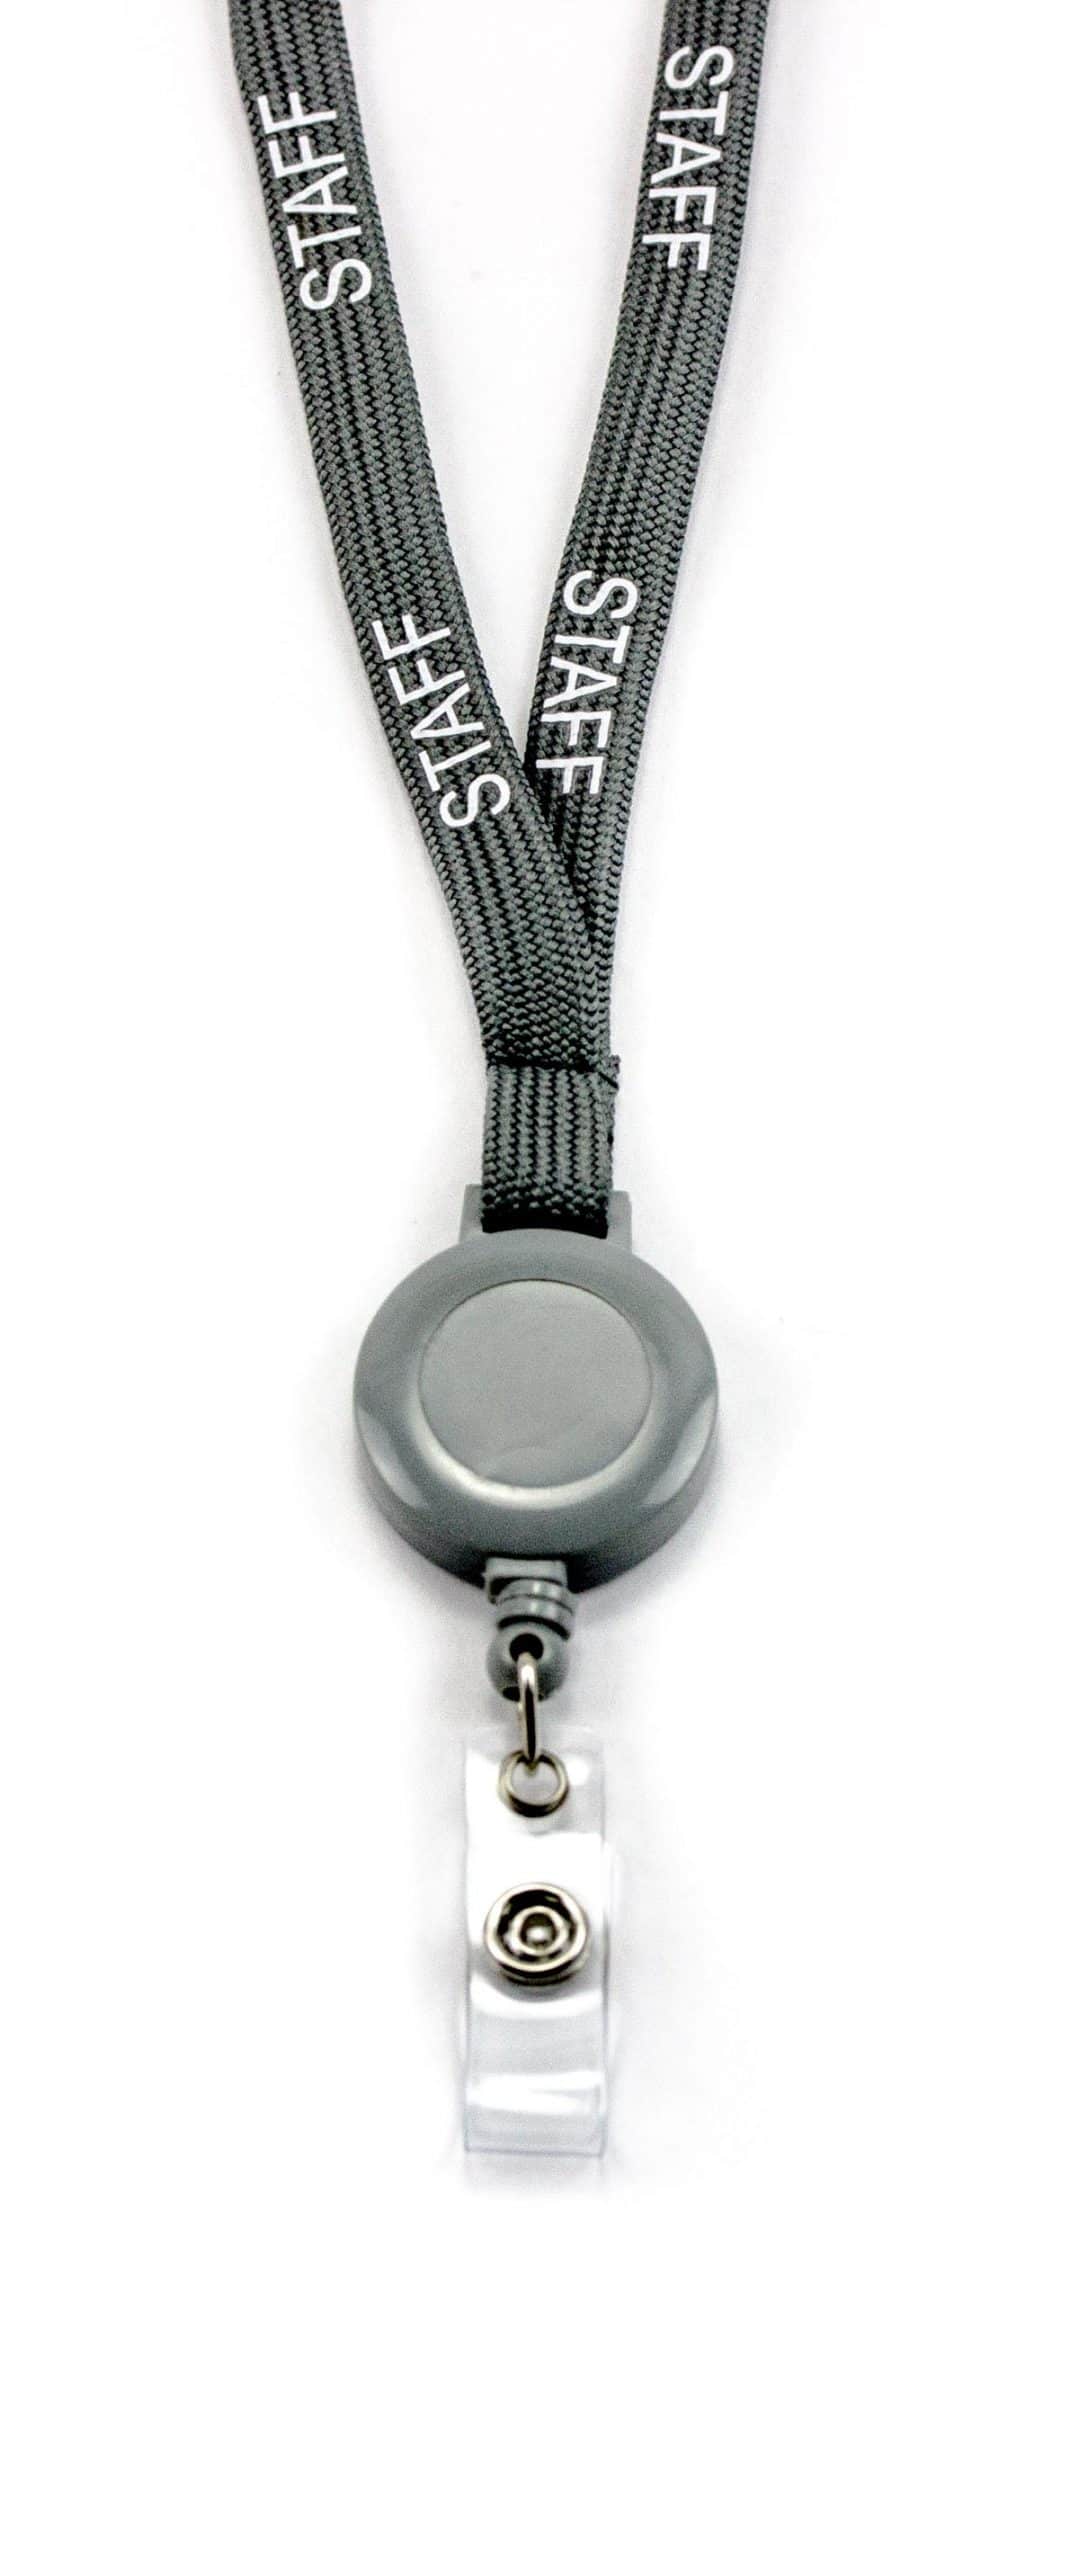 https://www.redstrawberry.co.uk/wp-content/uploads/nc/data/images/RS15/20088-Staff-Grey-Retractable-Lanyard-2-scaled.jpg